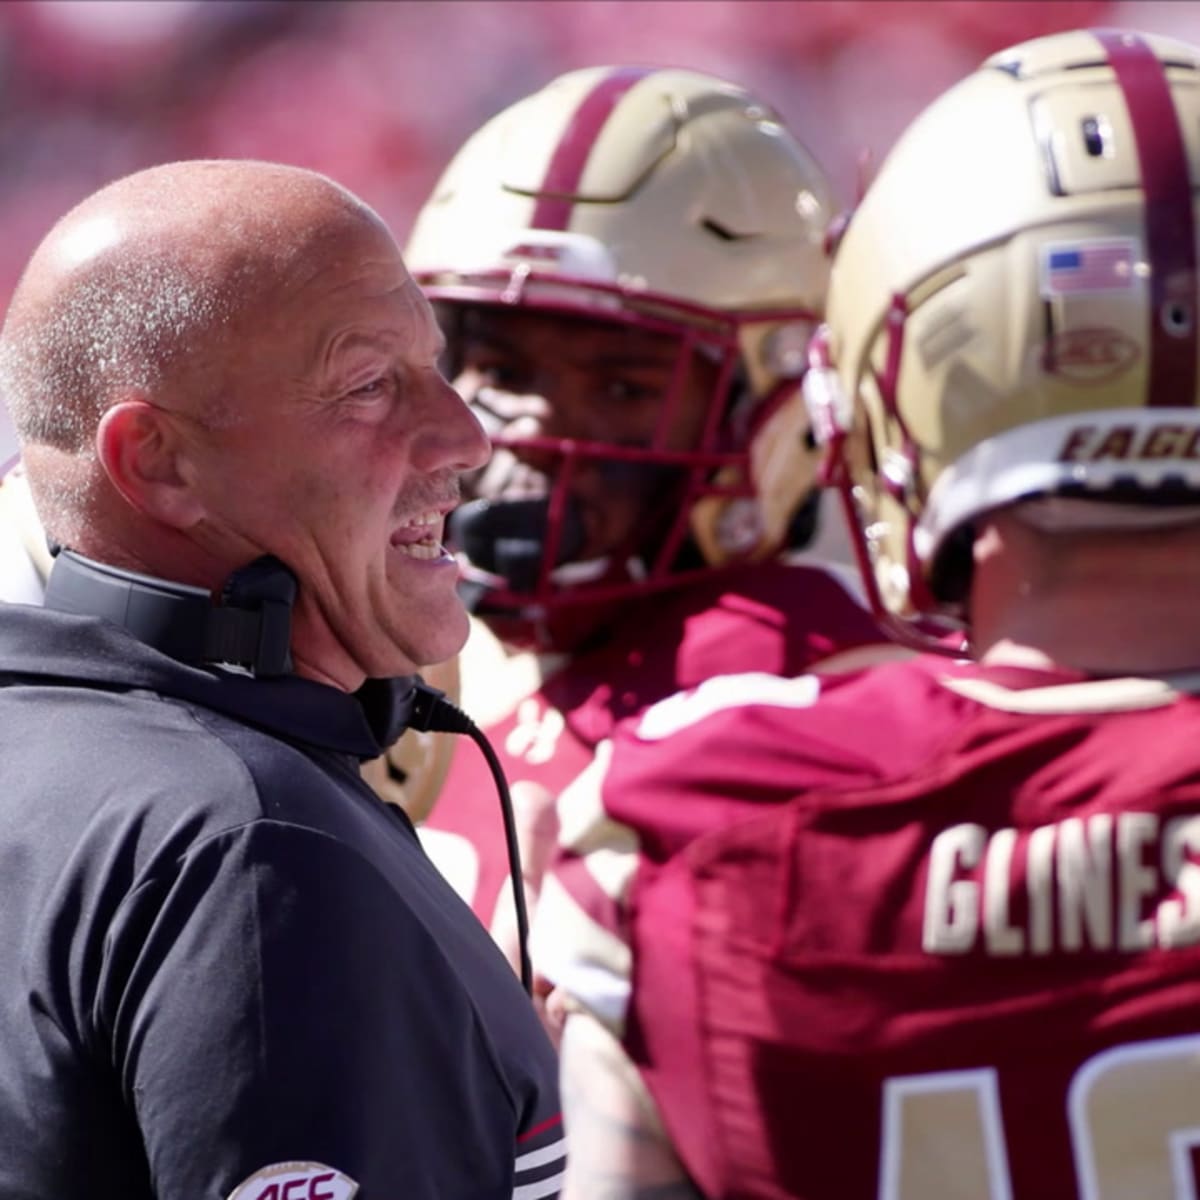 What Boston College and Steve Addazio say about Louisville football